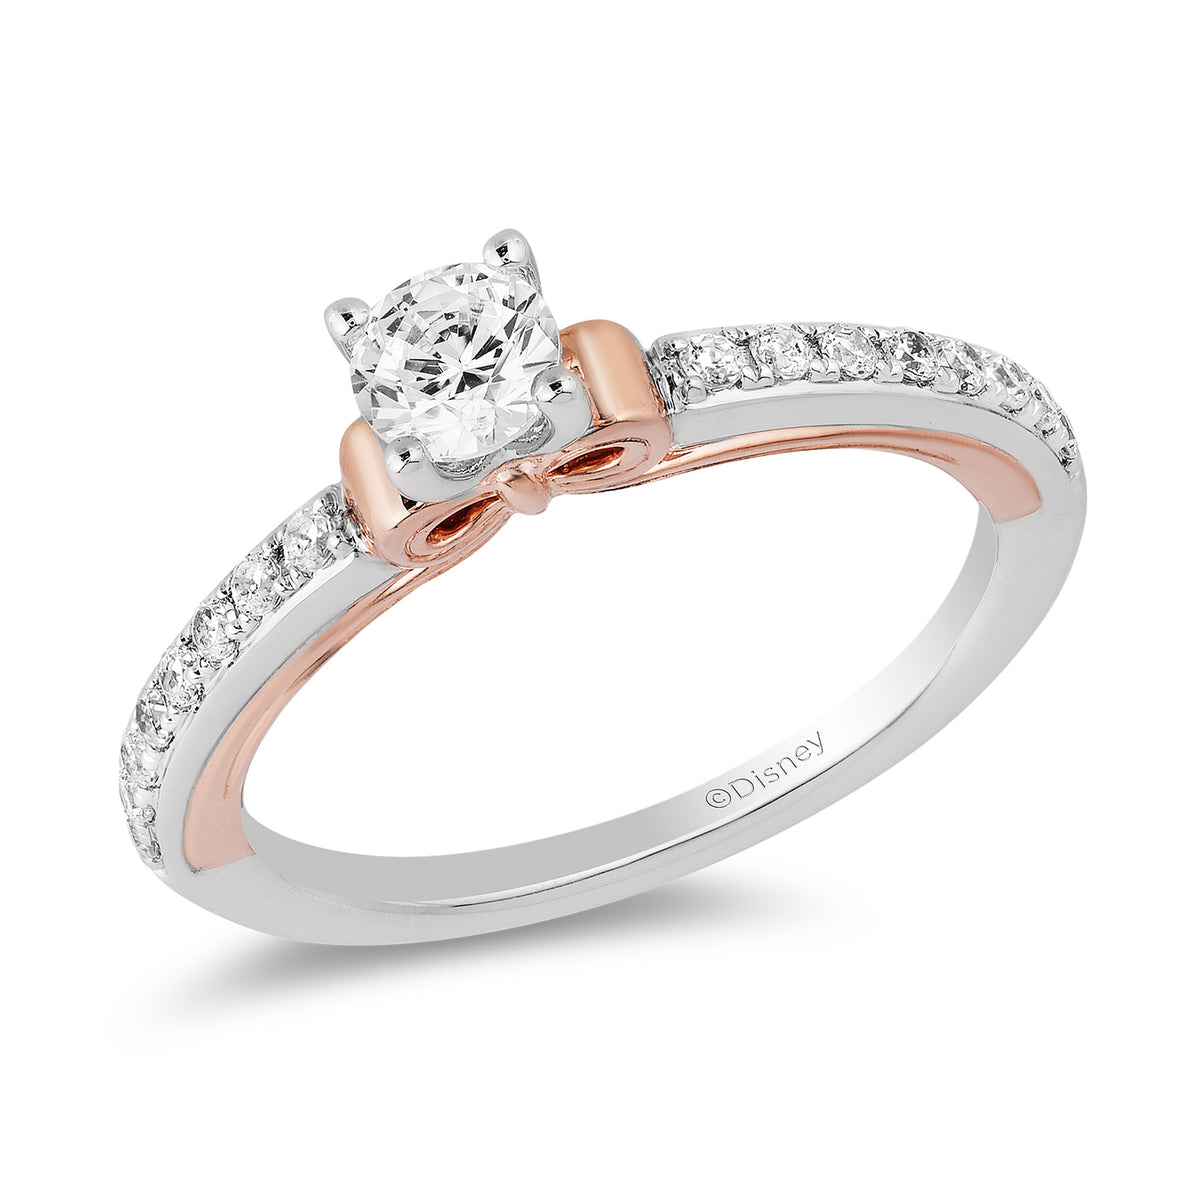 Princess Fairy Tale Round Center Stone Carriage Ring 14K Rose Gold